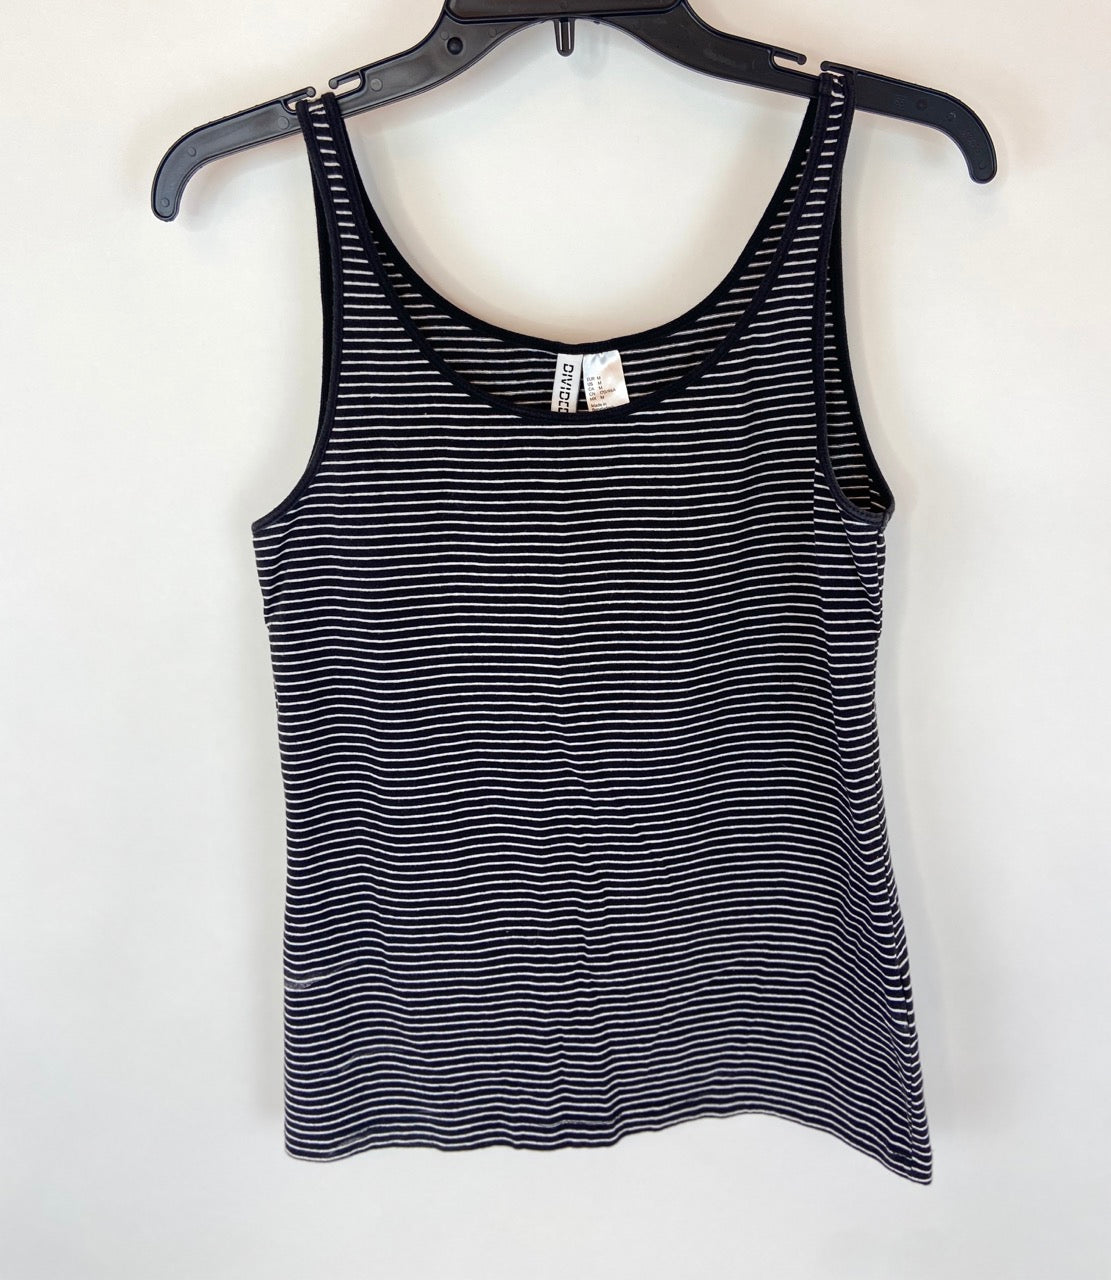 H&M Basic Black and White Striped Cotton/Spandex Tank- M – The Adopted  Closet